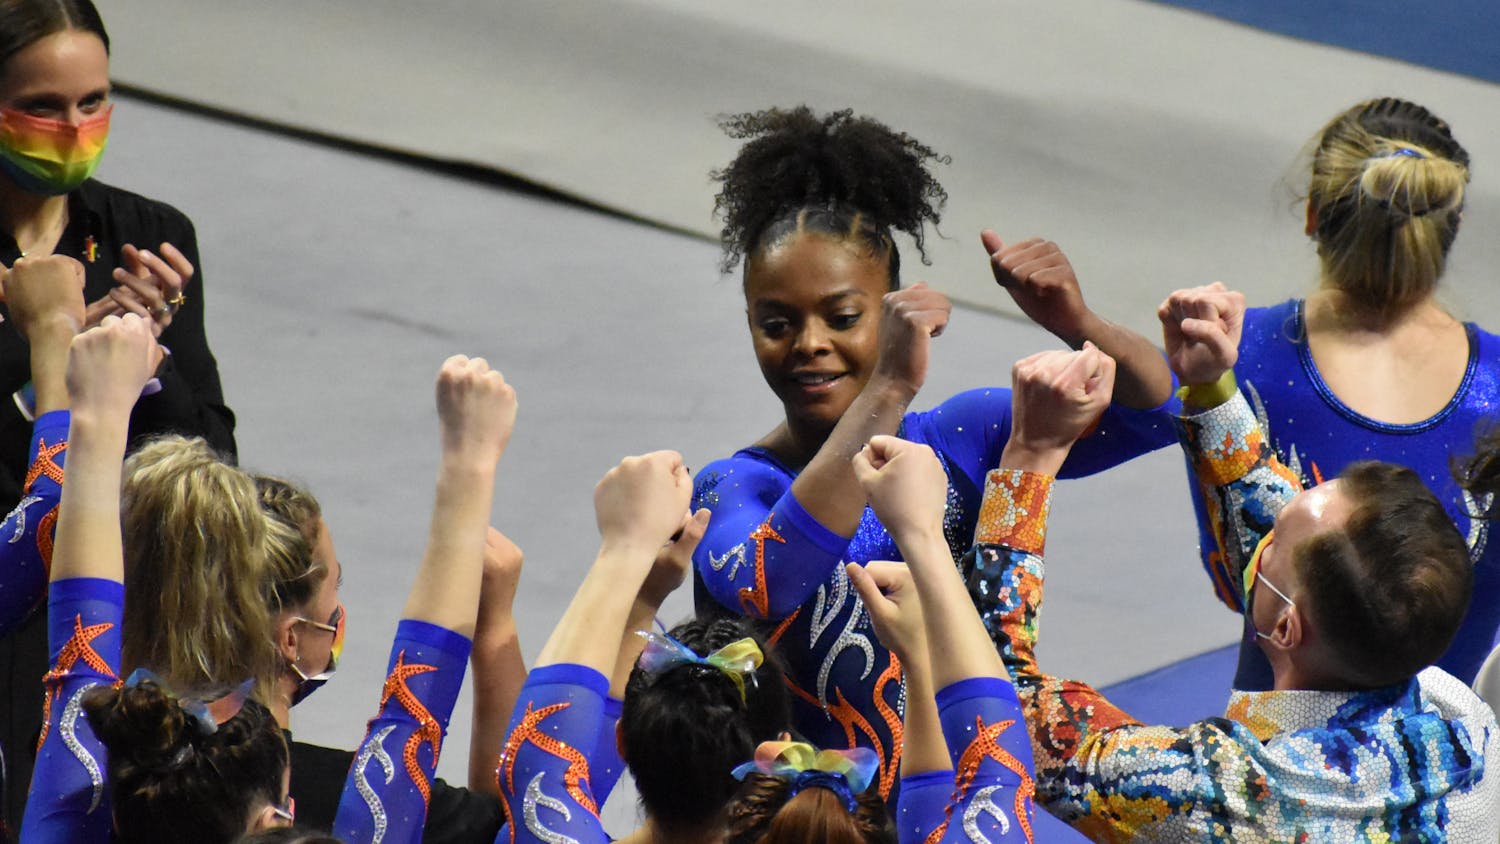 Trinity Thomas leads her team in celebration against Missouri Jan. 29, 2021. Thomas announced Monday she will return for her fifth season at UF.